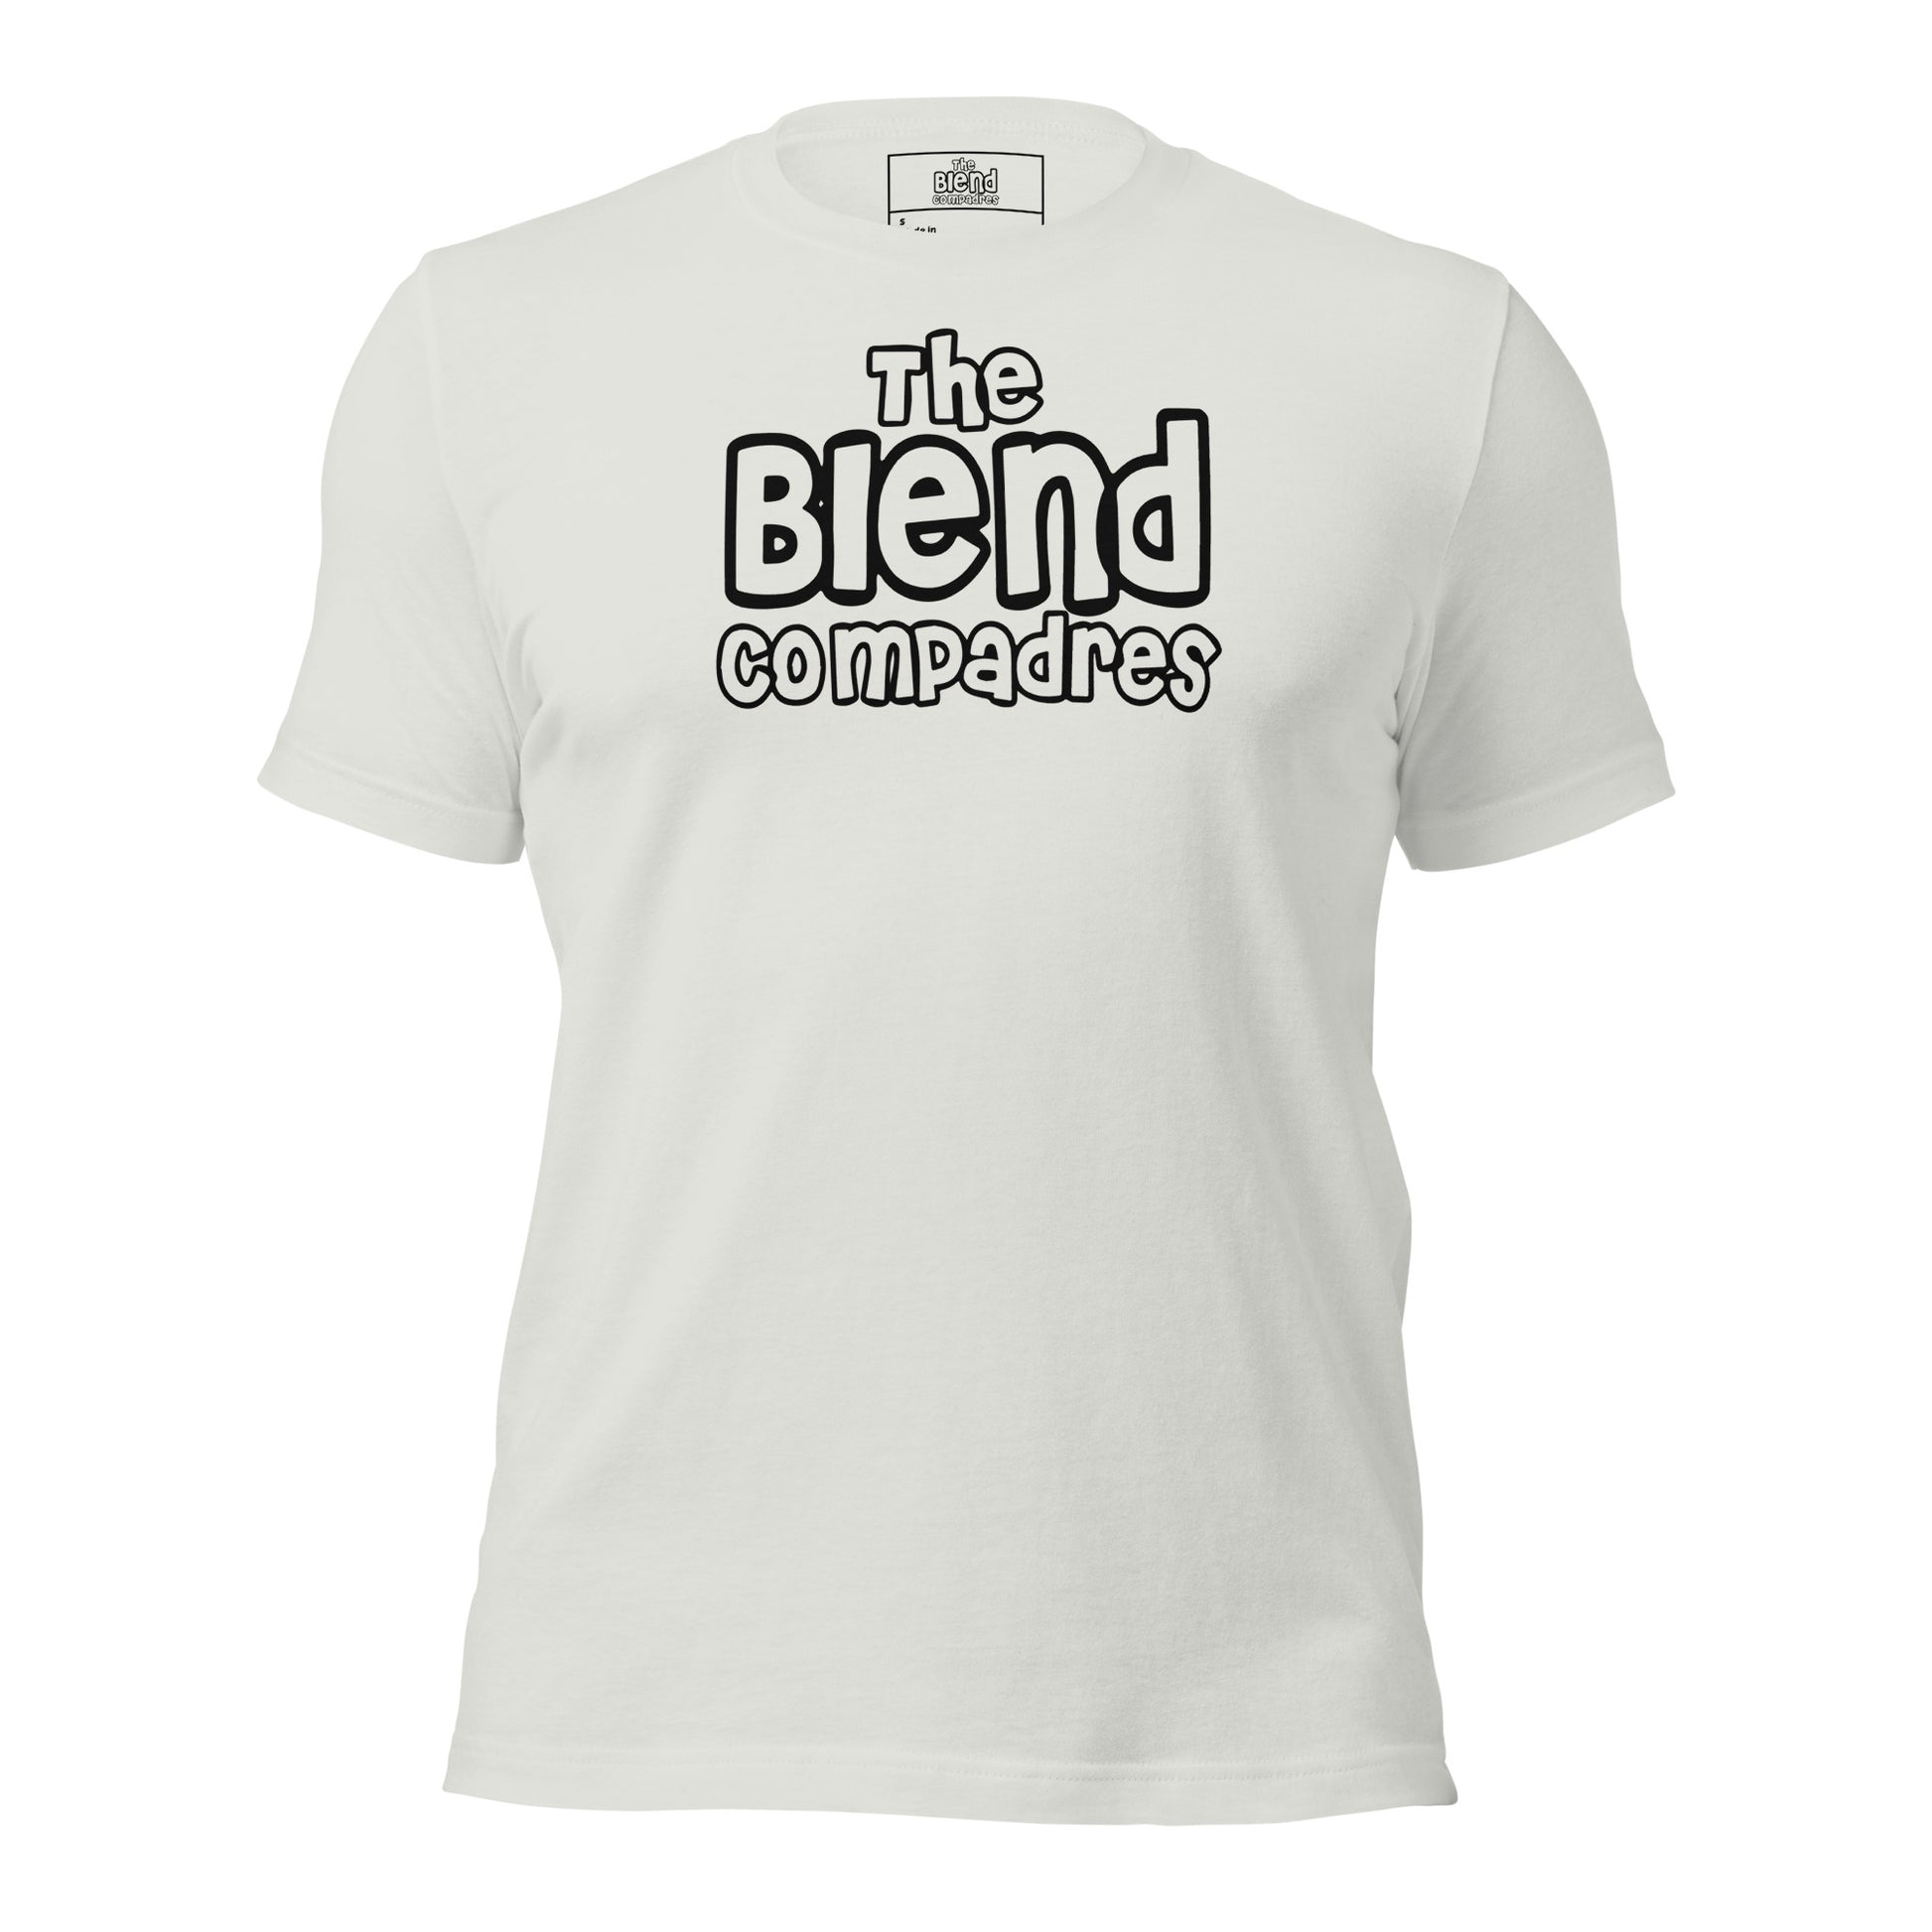 The Blend Compadres Unisex t-shirt - Another Bodega